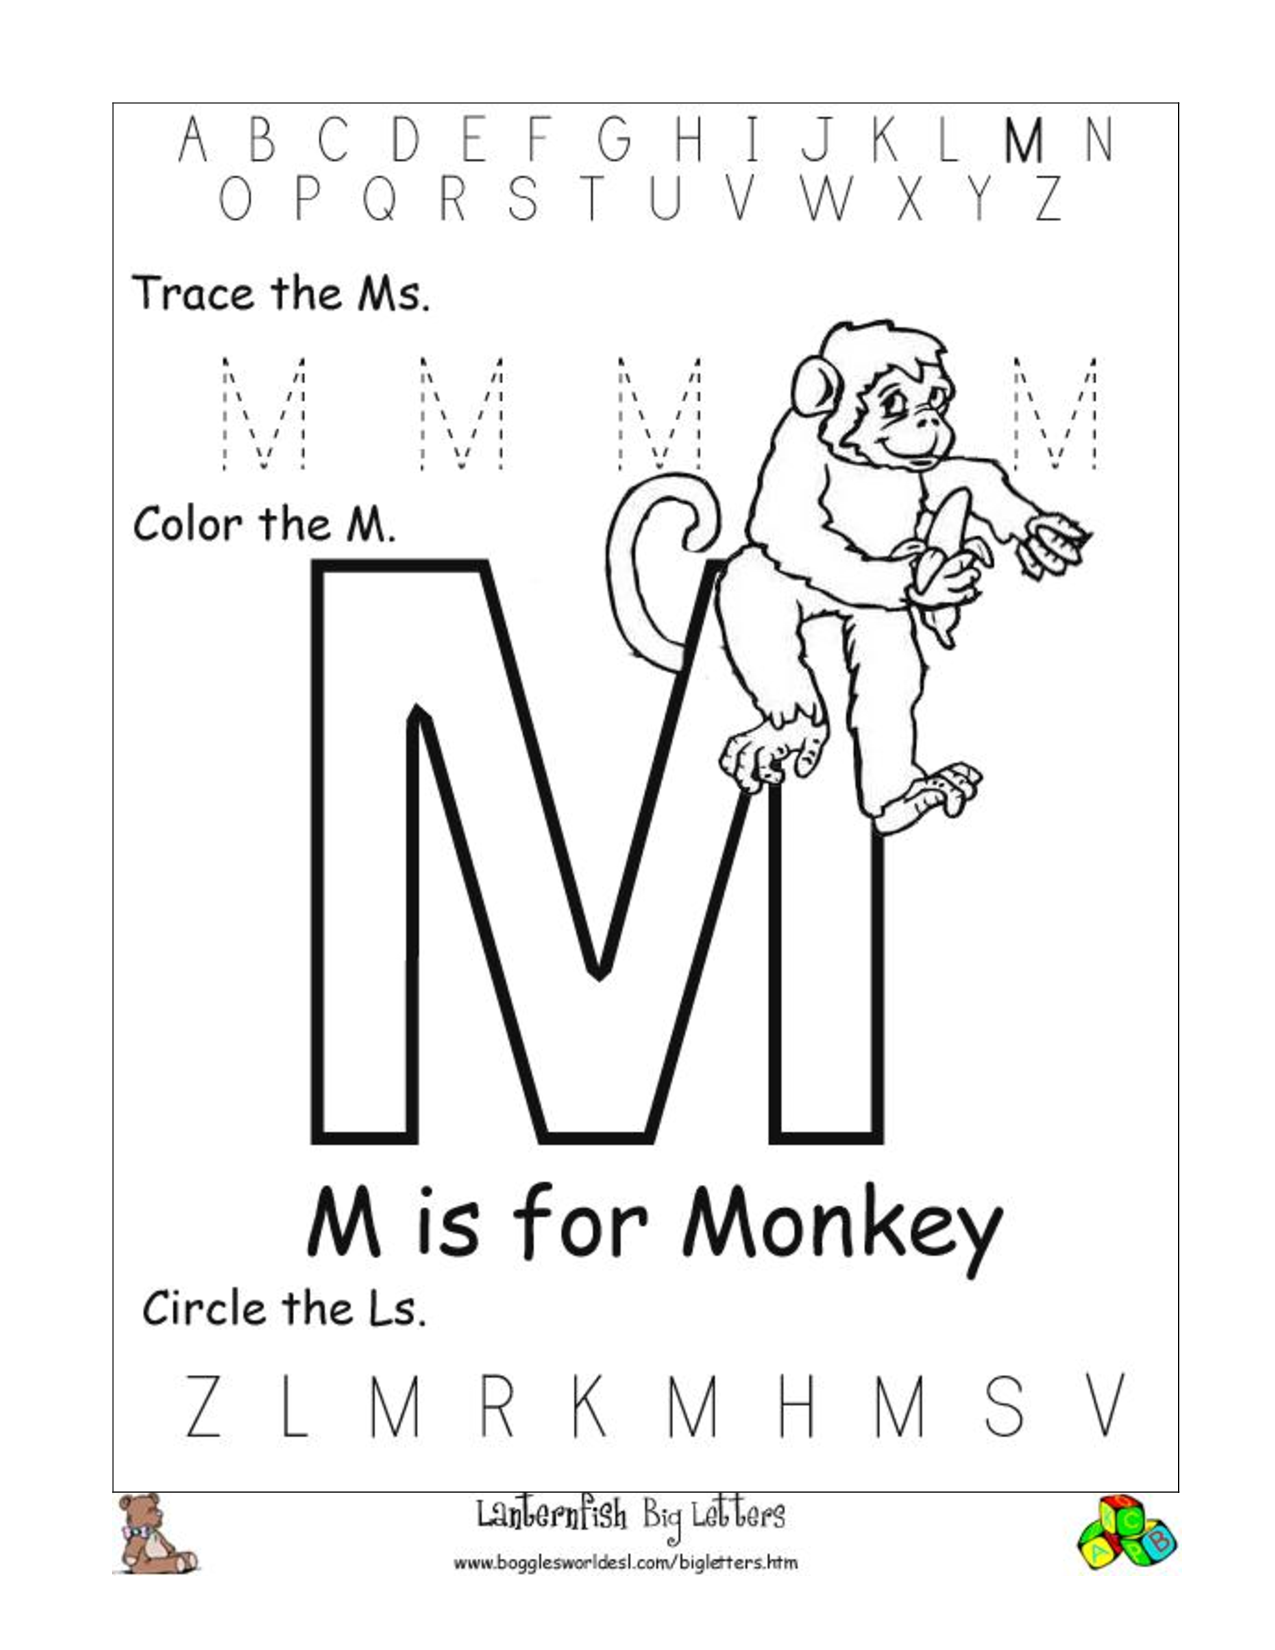 15 Best Images of Letters Of The Alphabet Worksheets ...